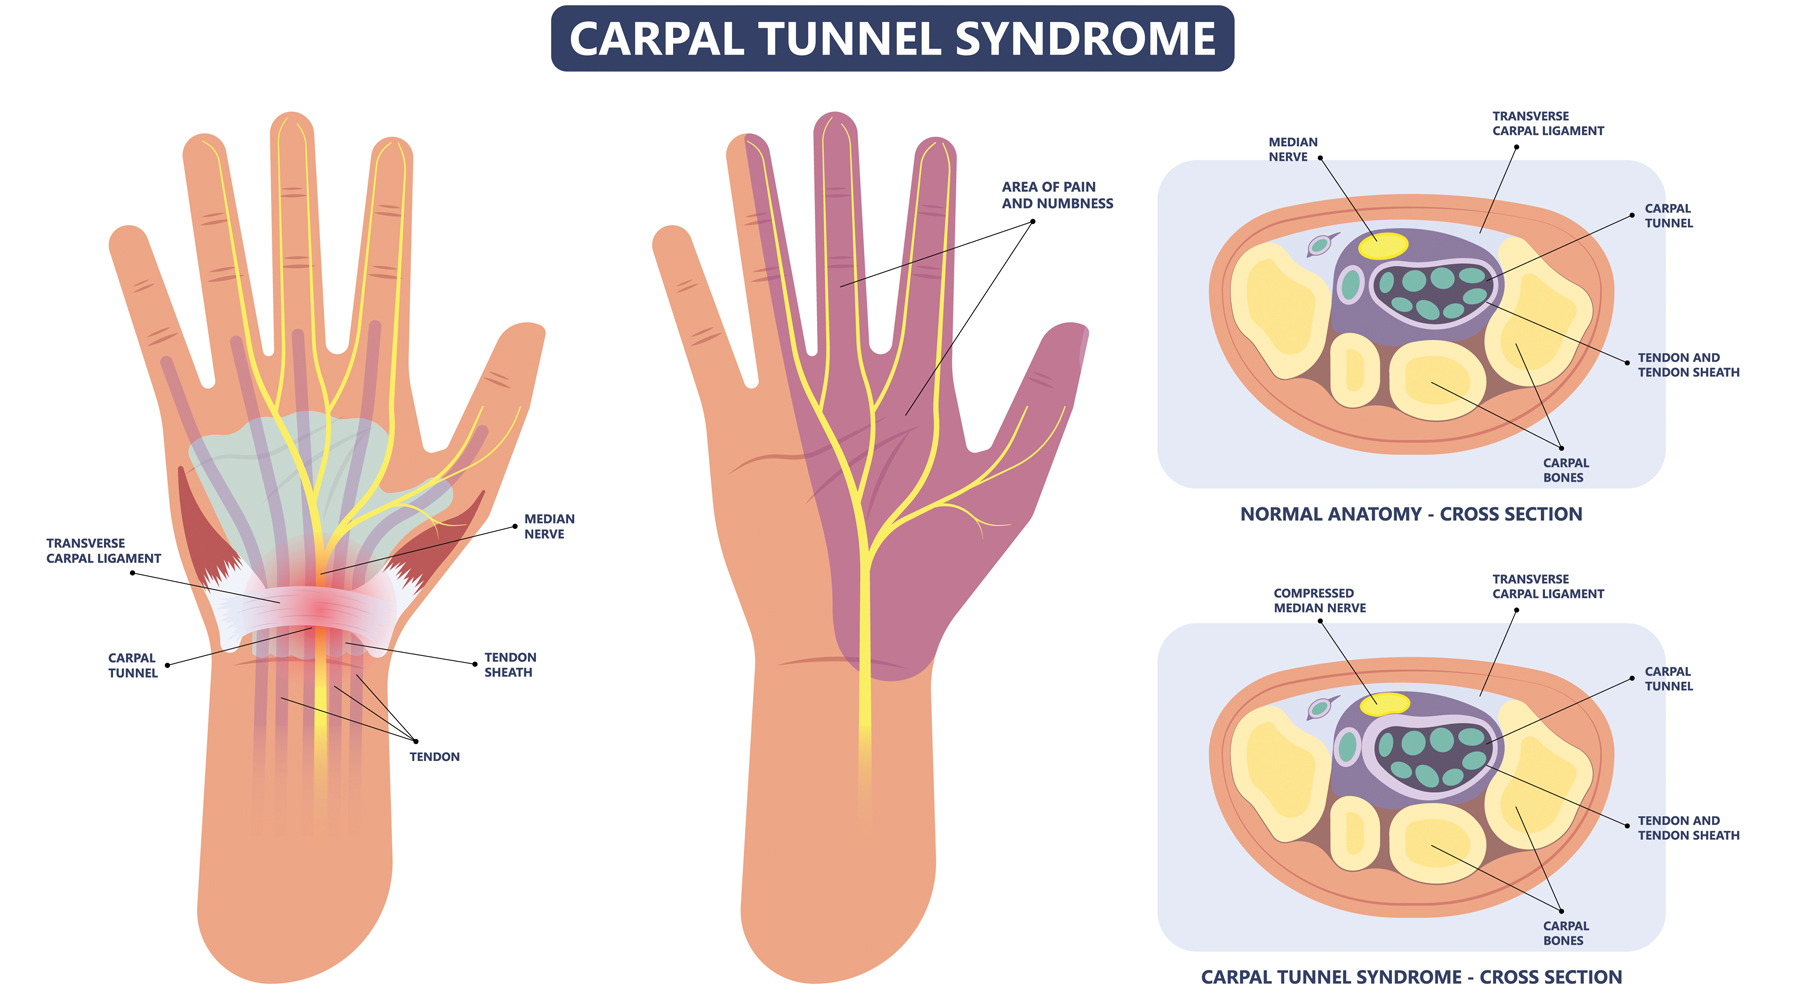 How to prevent carpal tunnel syndrome